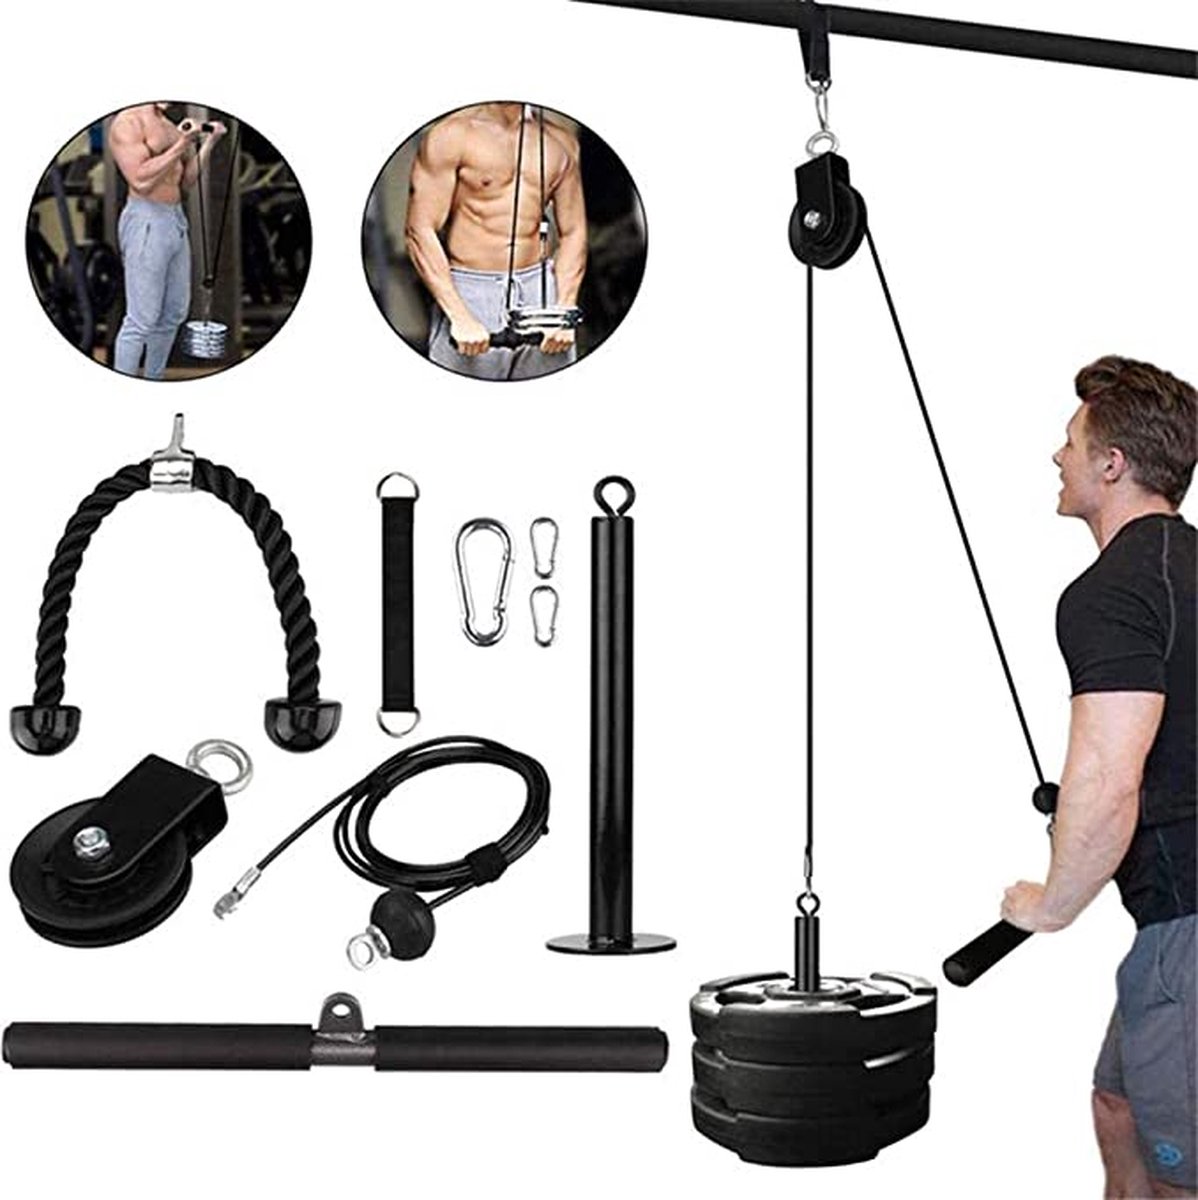 katrol fitness - fitness - home gym - lat pully